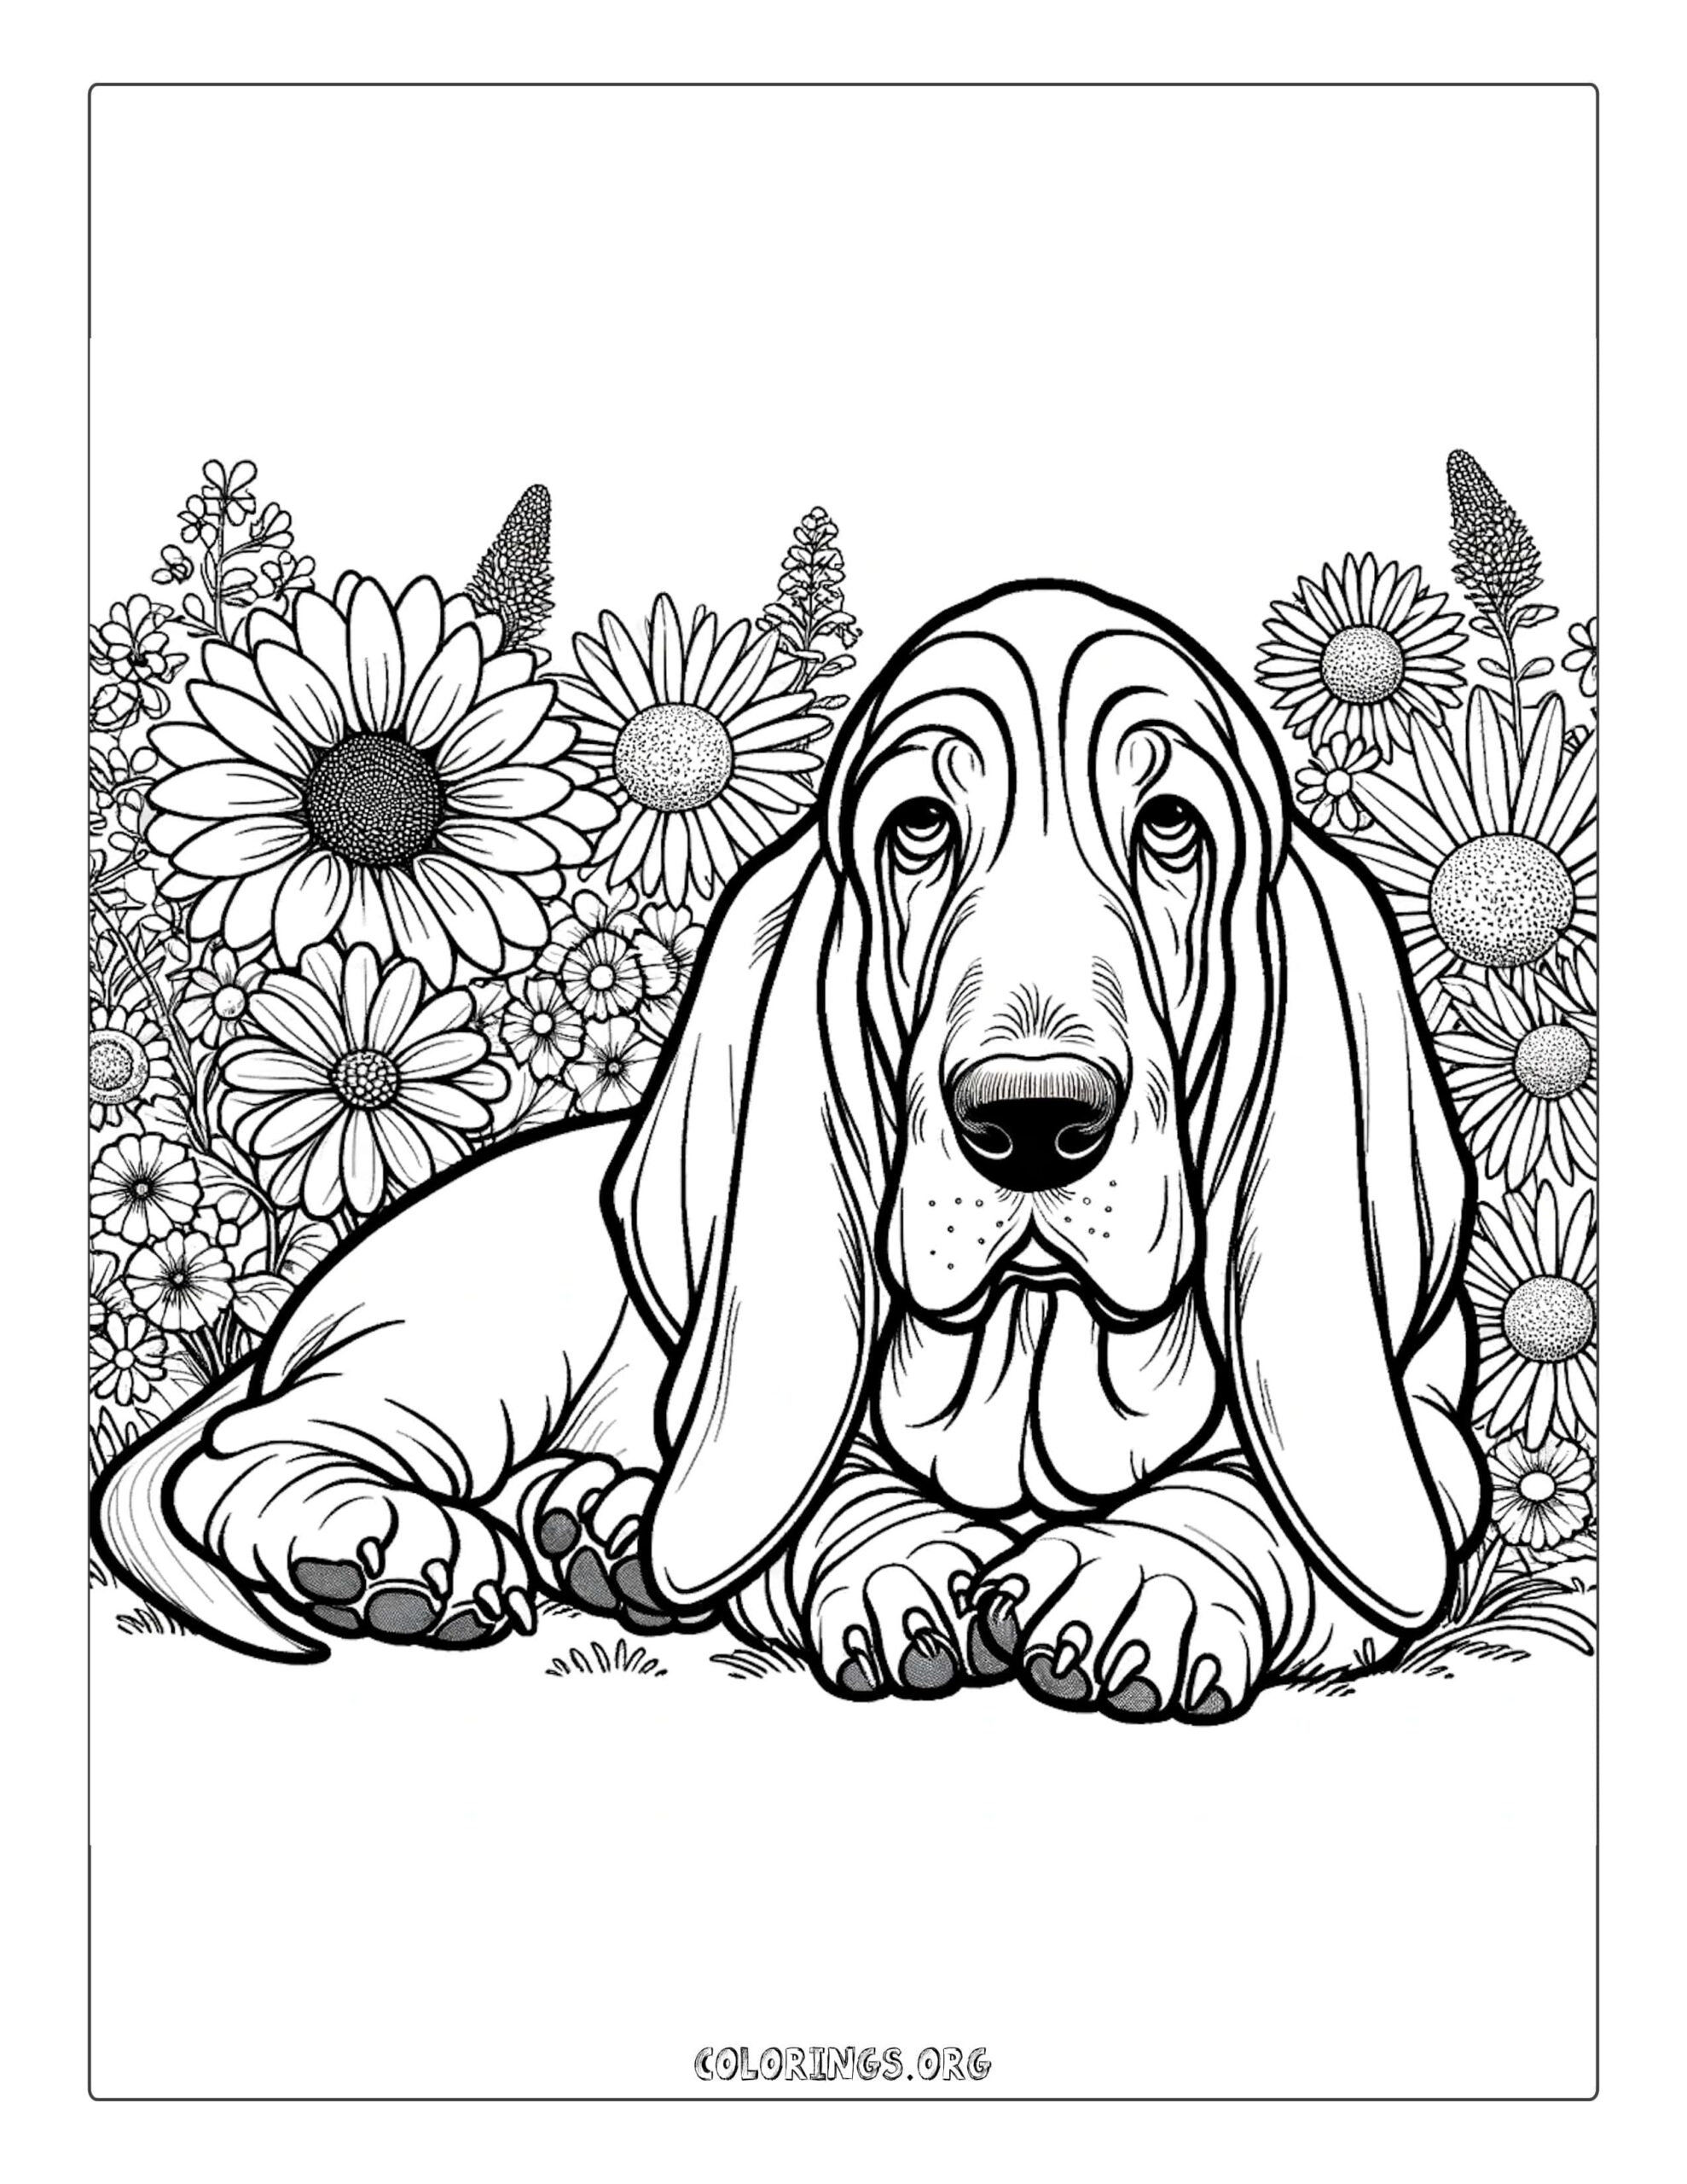 Basset hound in garden coloring page